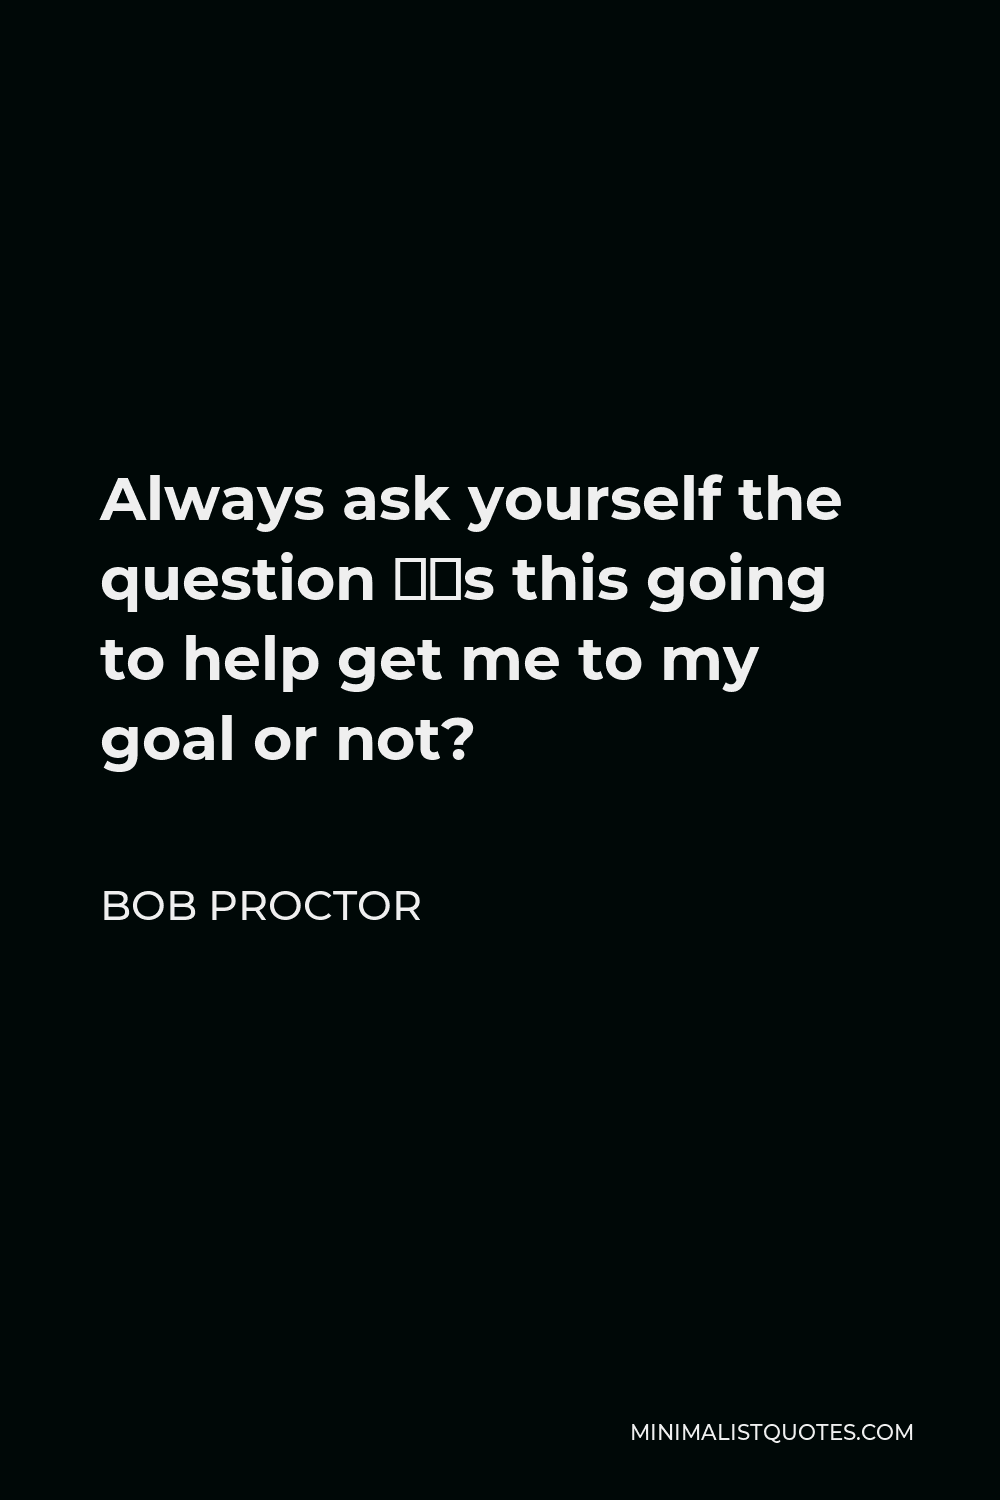 Bob Proctor Quote - Always ask yourself the question “Is this going to help get me to my goal or not?